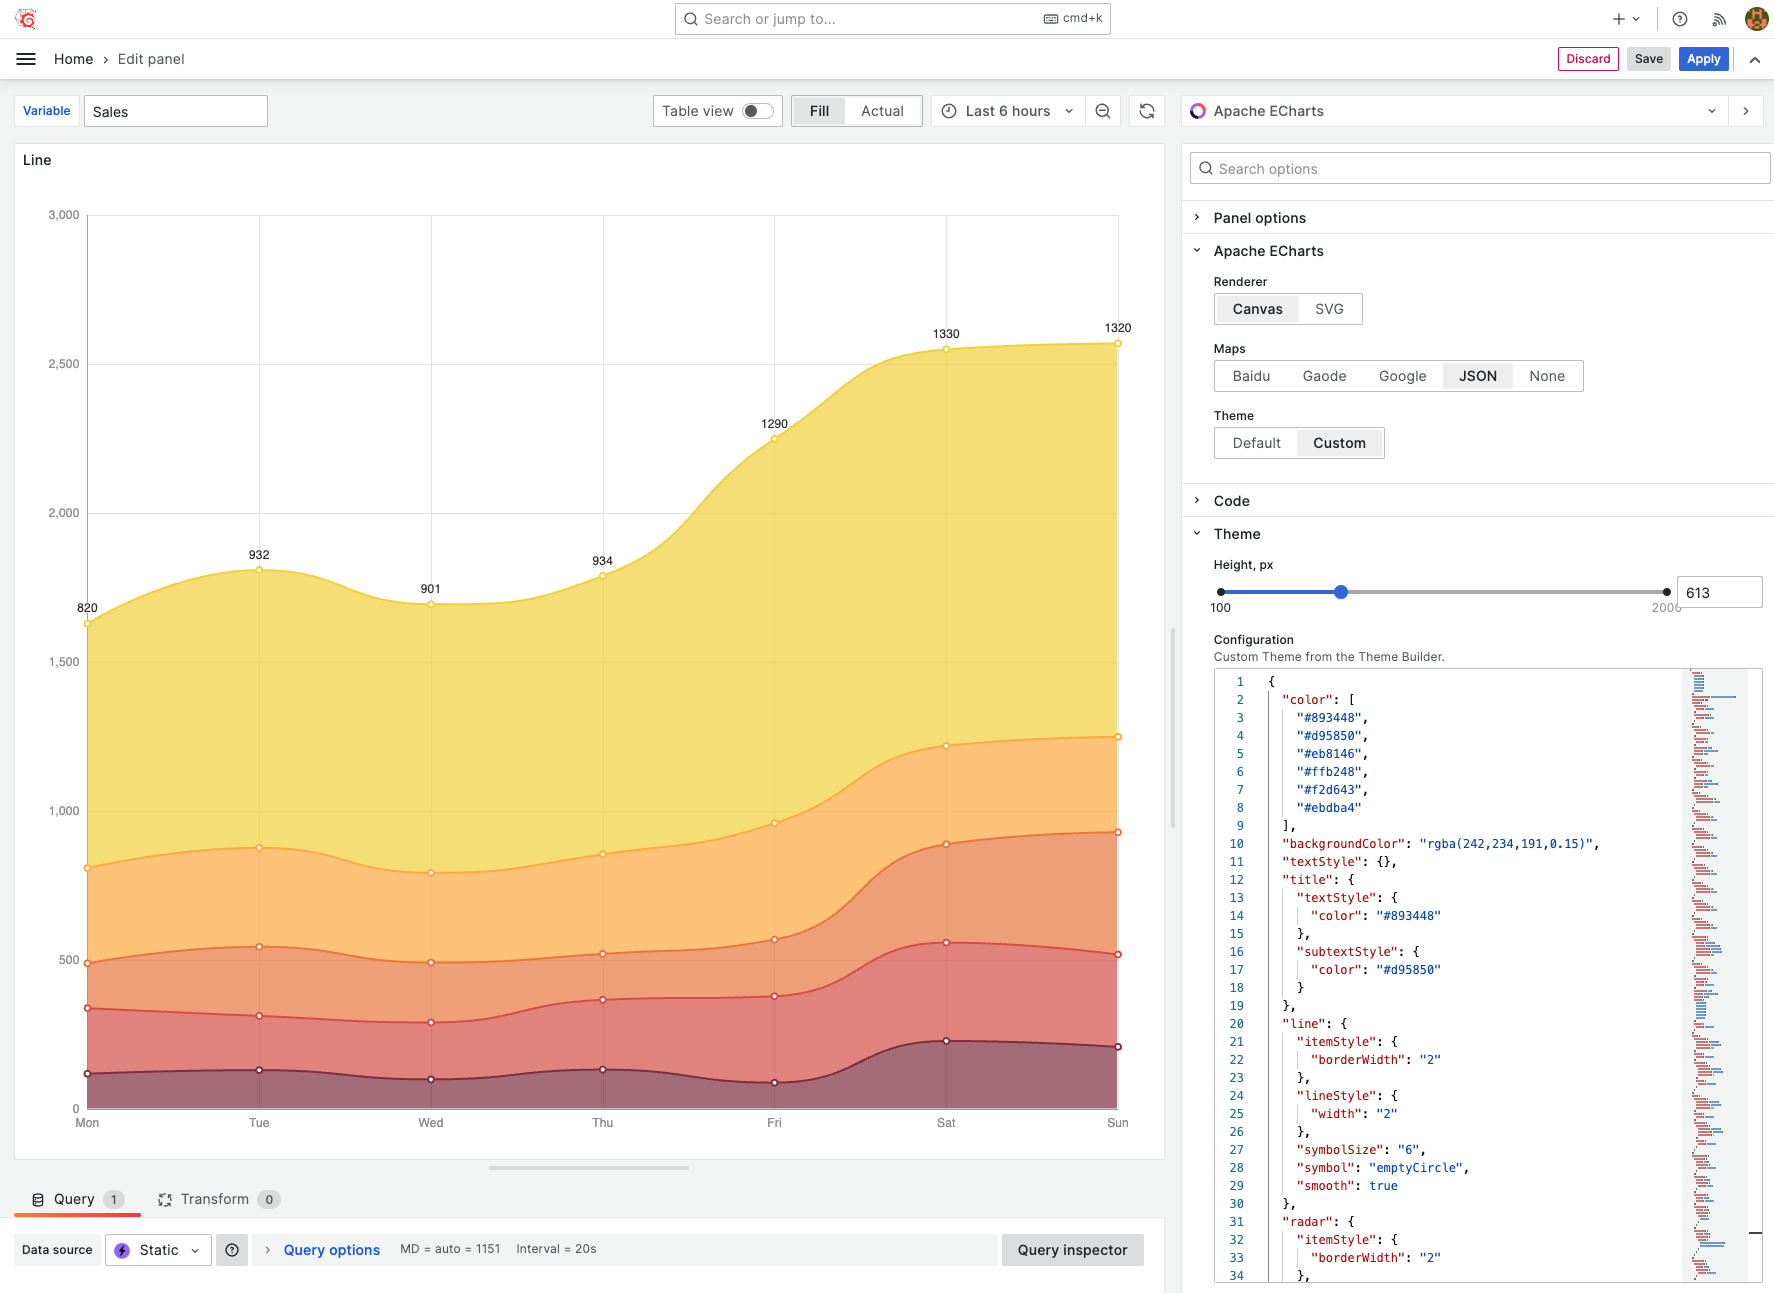 Apache ECharts visualization panel supports custom theme from Theme Builder.